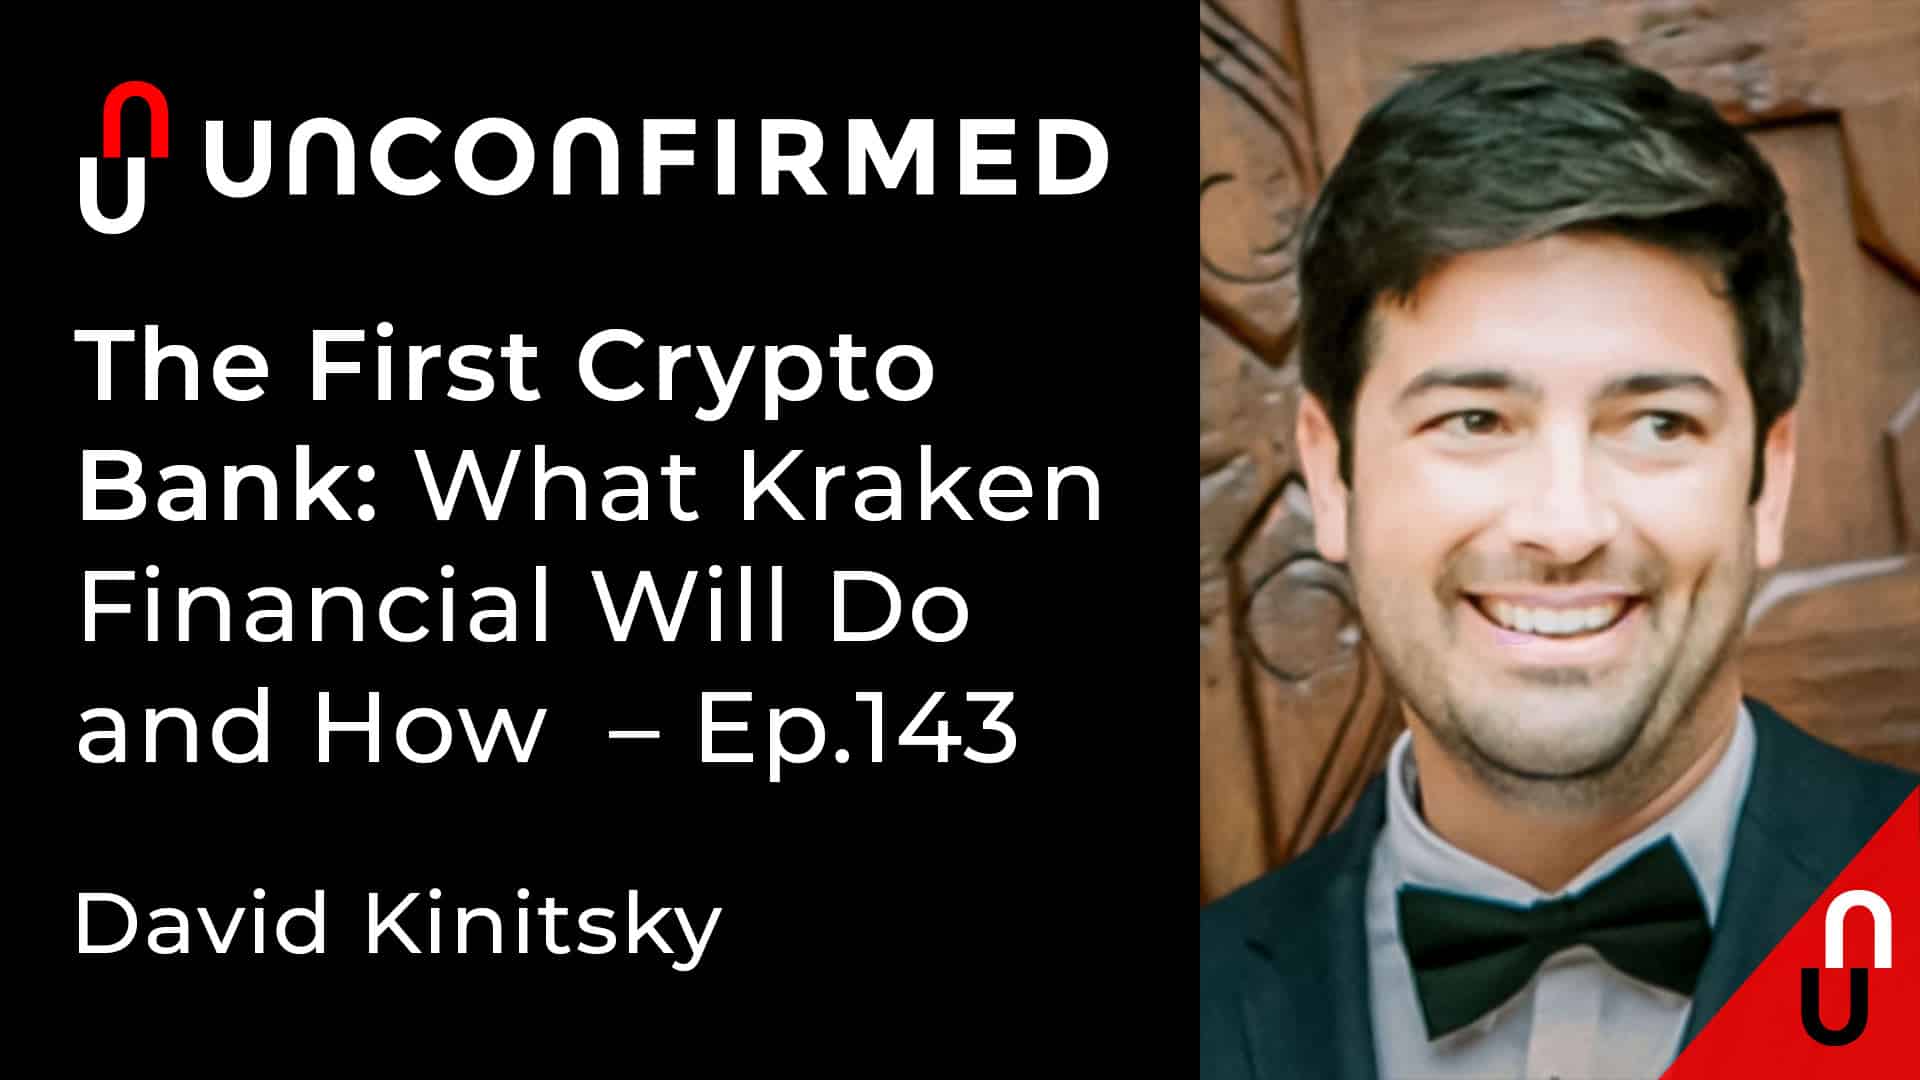 Unconfirmed - Ep.143 - The First Crypto Bank - What Kraken Financial Will Do and How